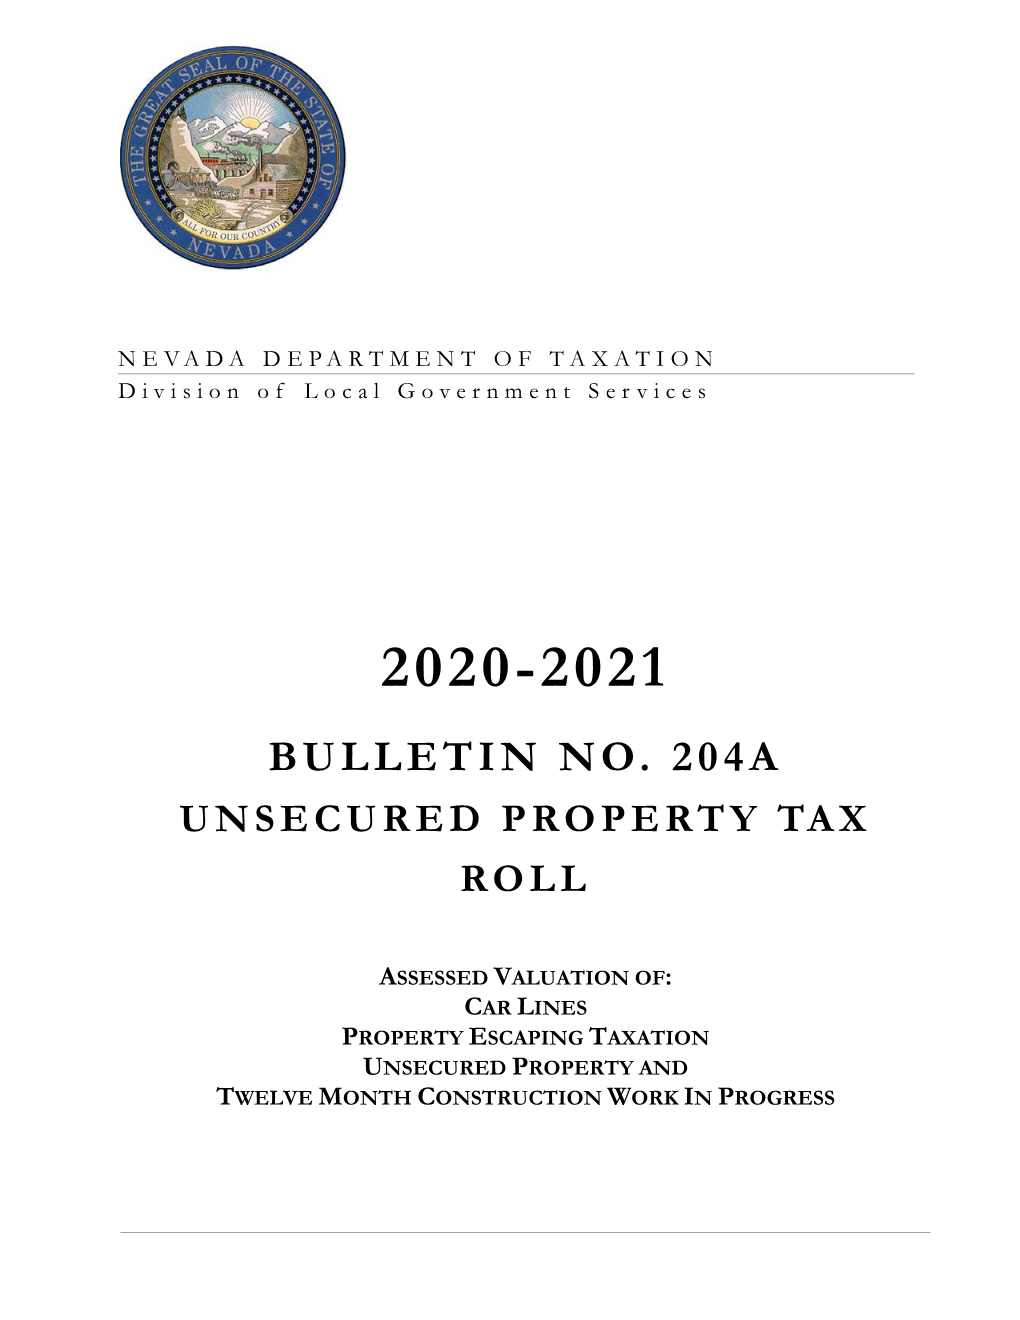 2020-2021 Unsecured Bulletin 204A